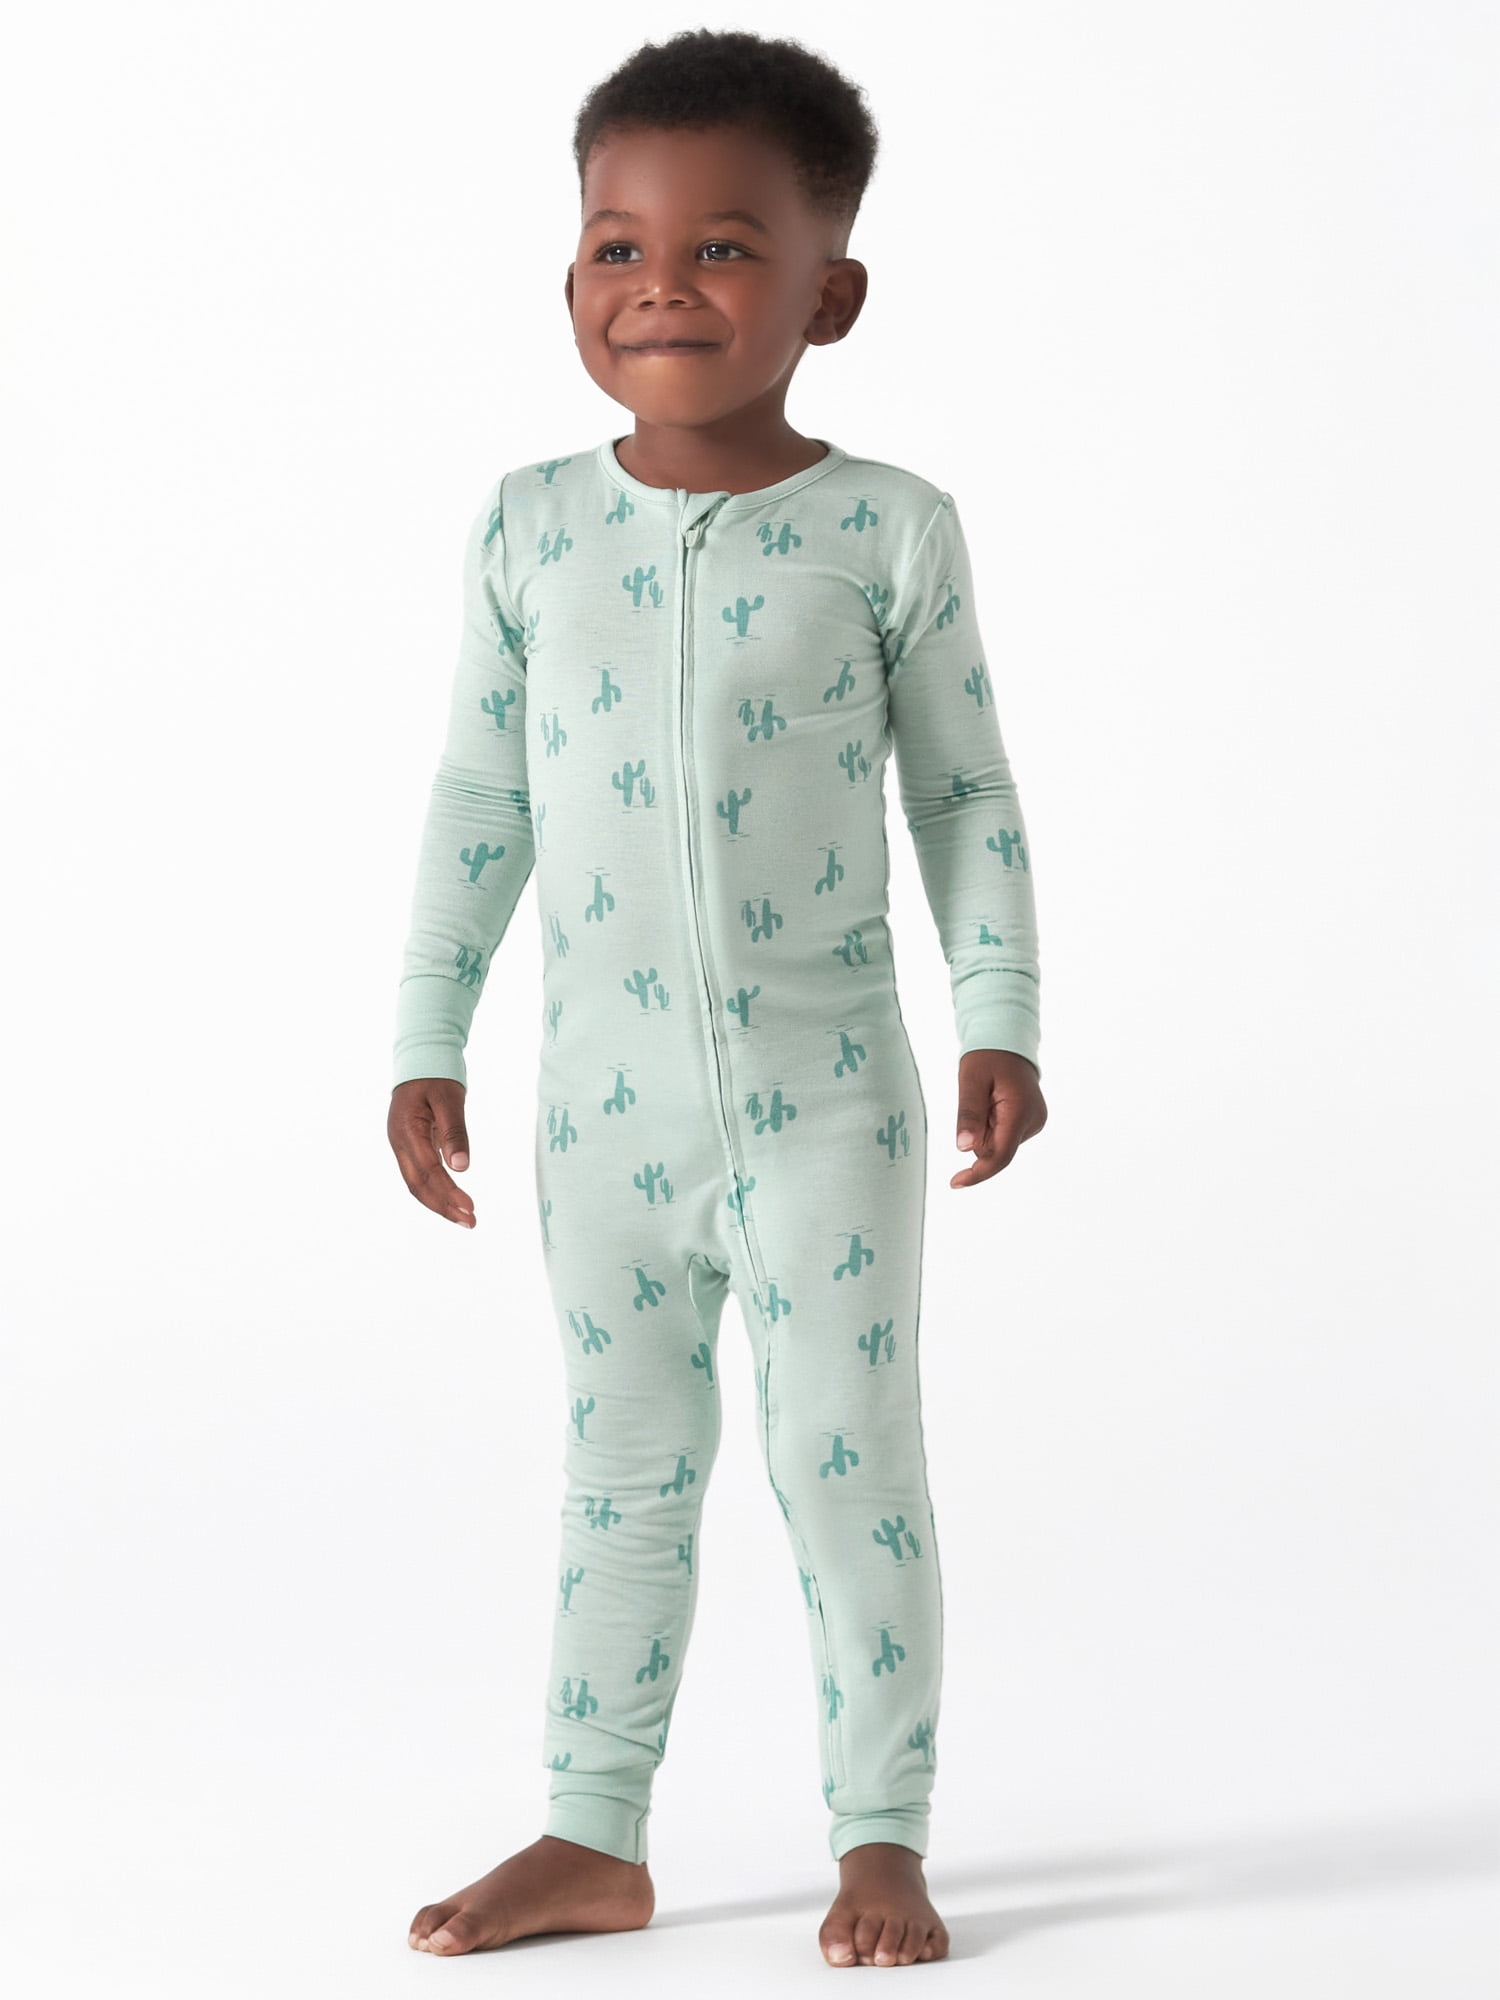 Modern Moments by Gerber Super Soft Baby and Toddler Unisex Snug Fit  Coverall Pajamas, Sizes 12M-5T